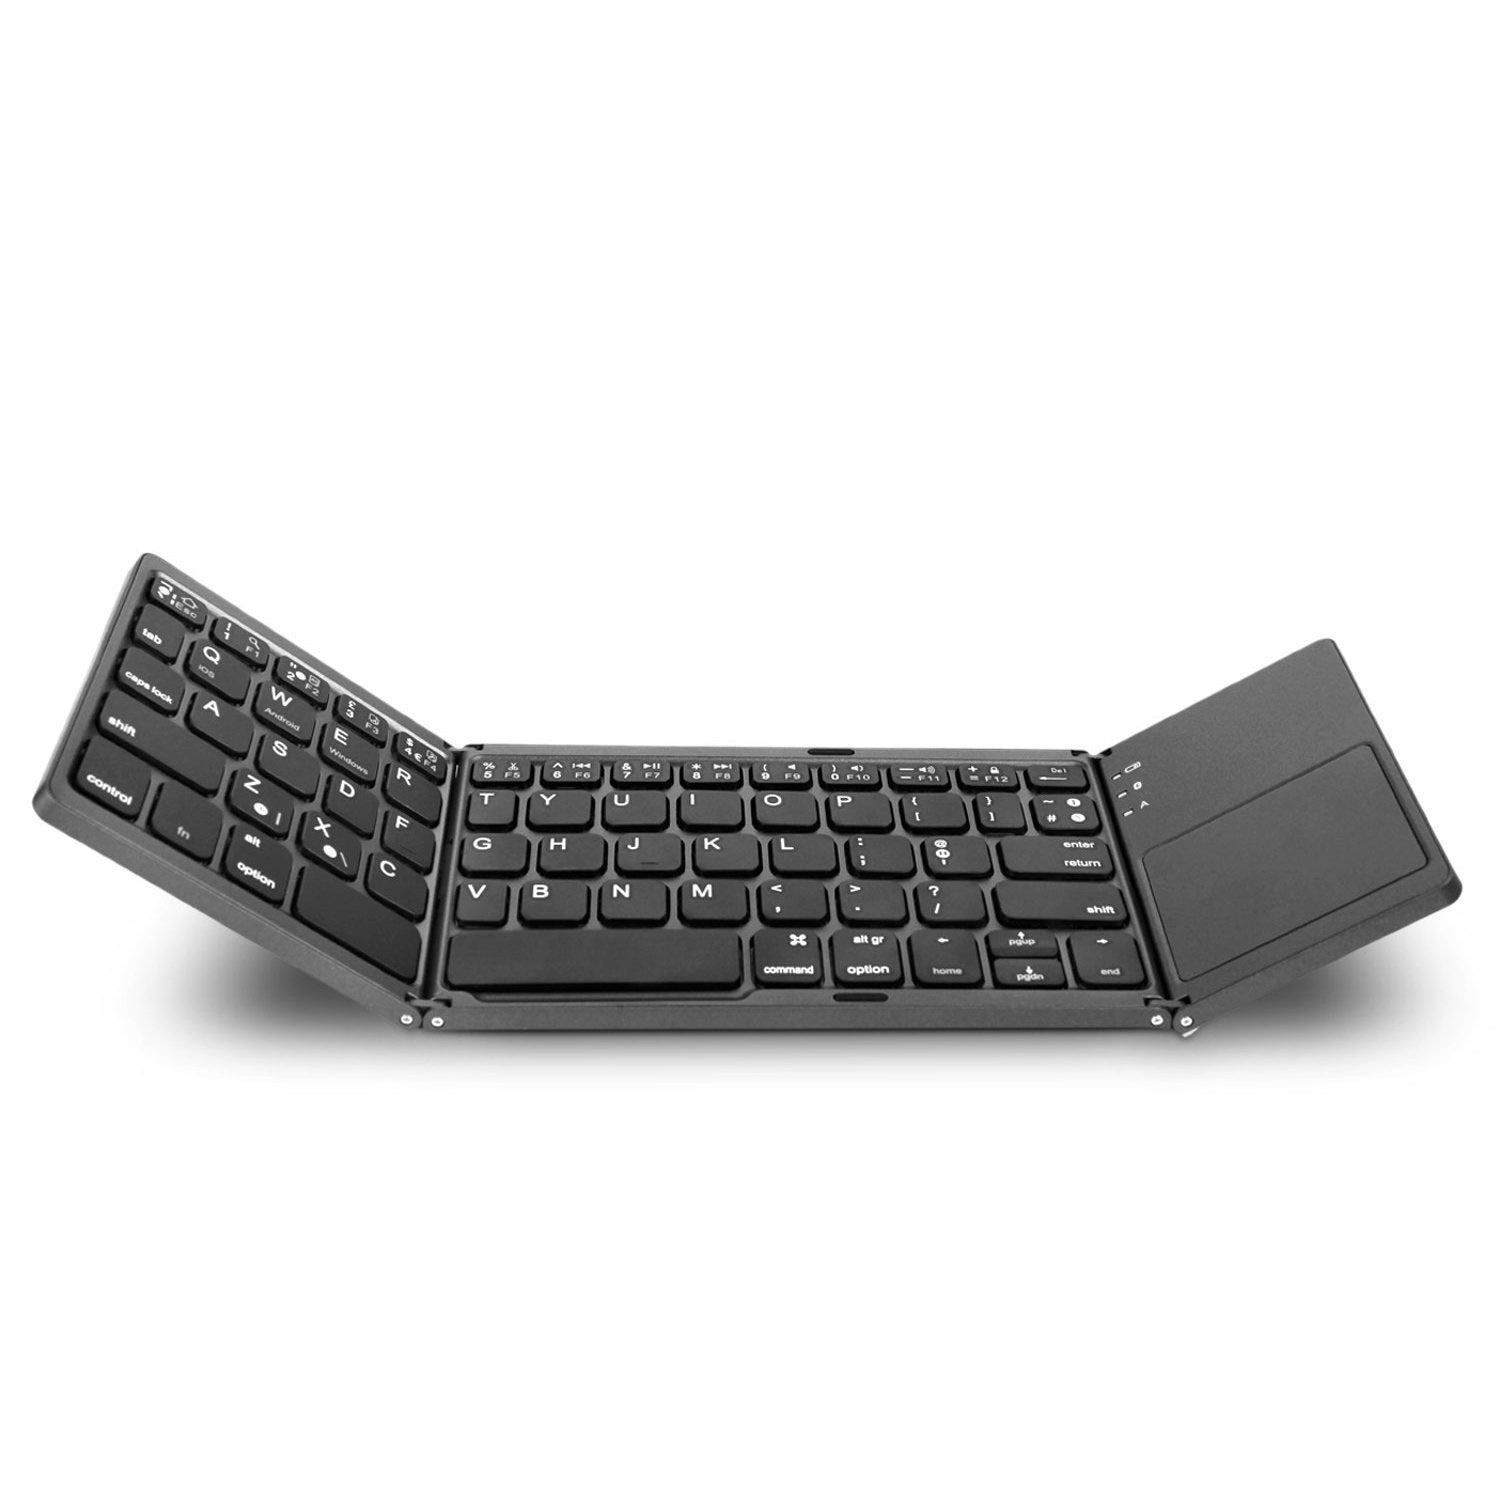 Portable Folding Wireless keyboard Bluetooth Rechargeable BT Touchpad Keypad for IOS/Android/Windows ipad Tablet-Black